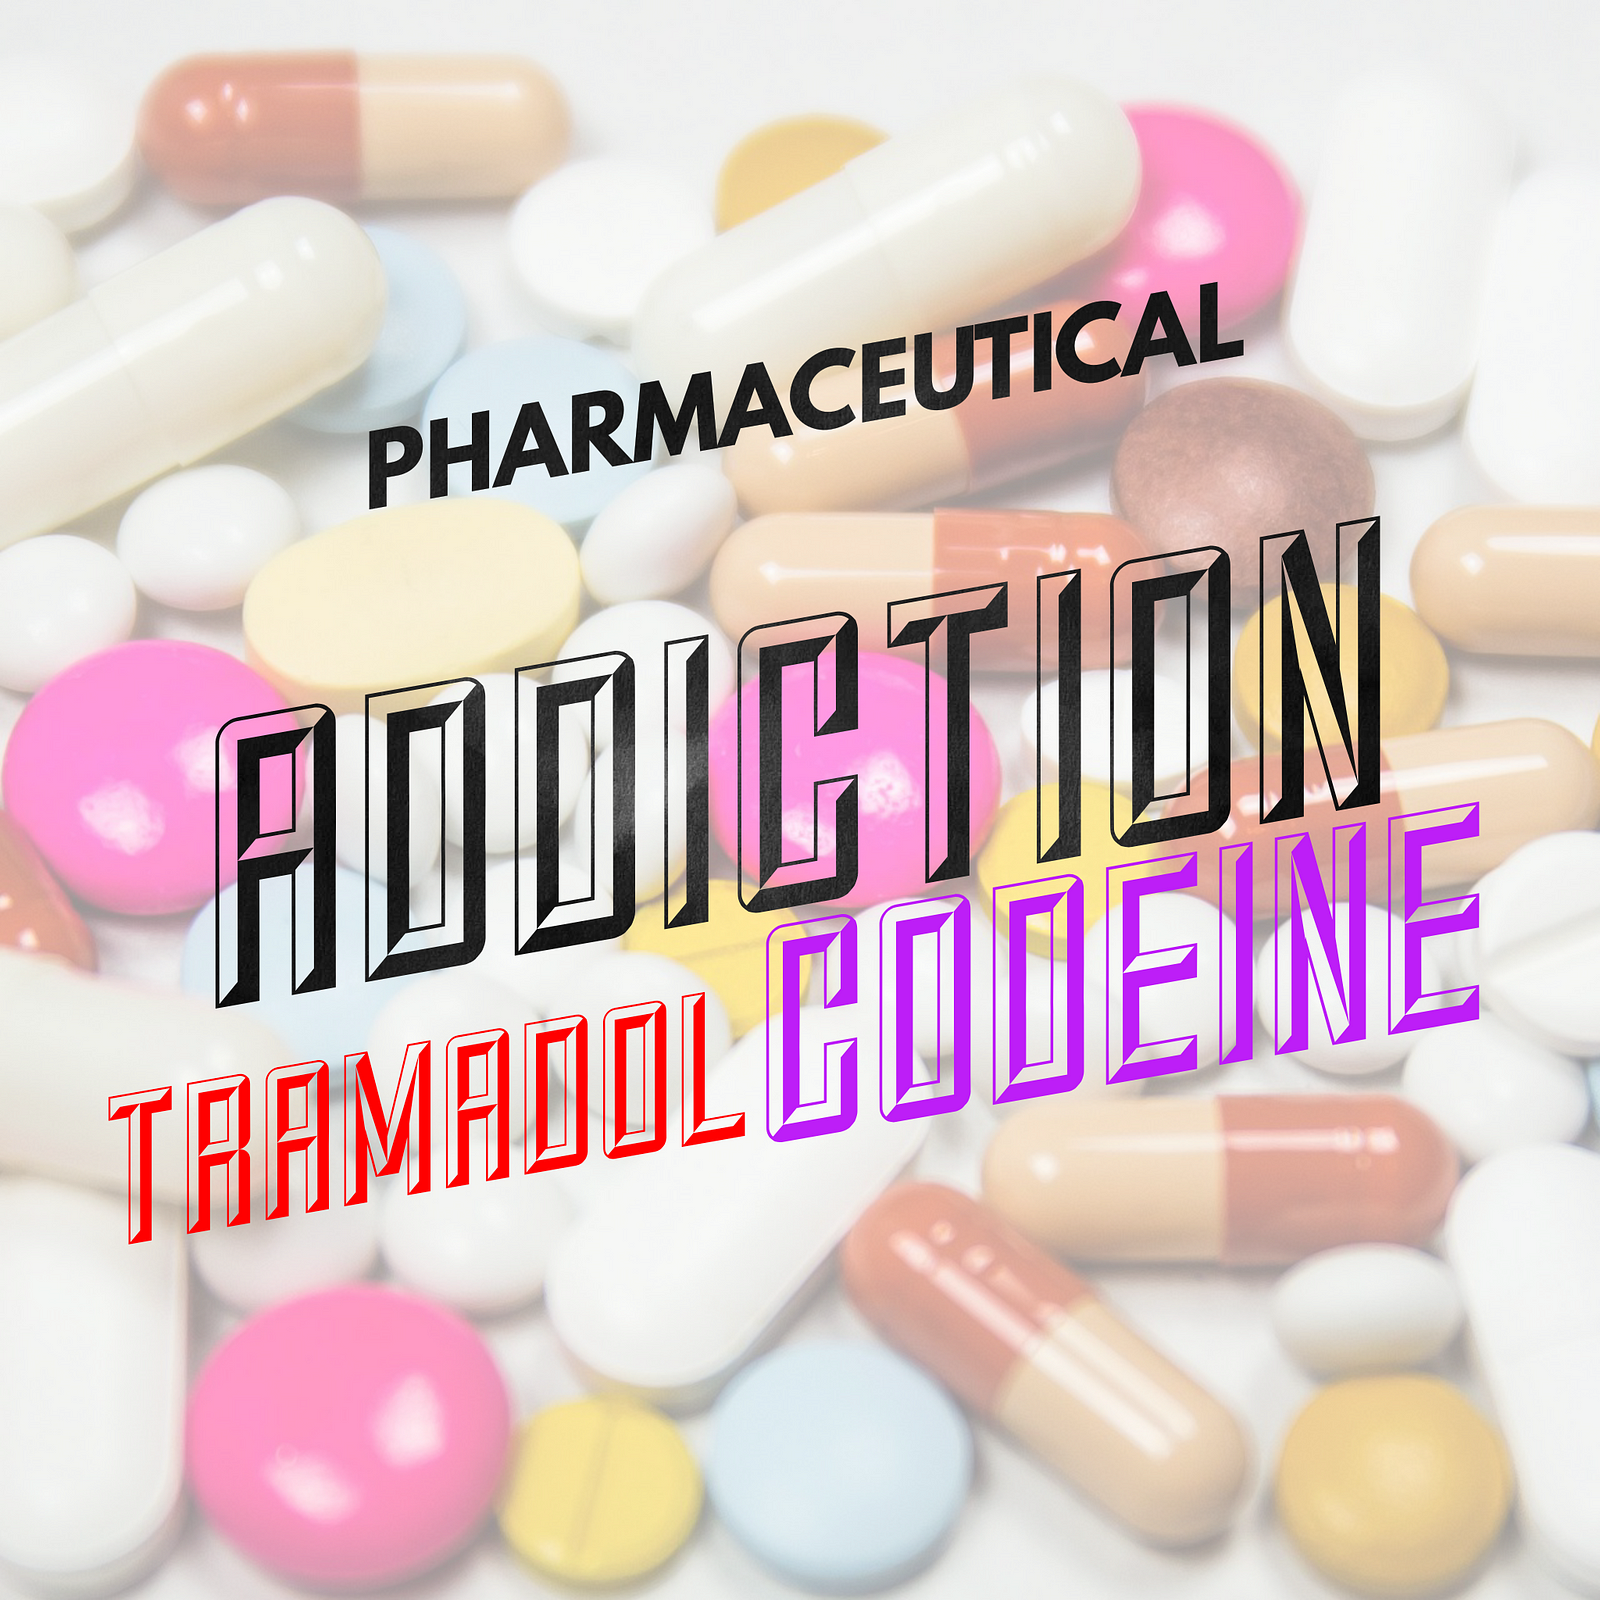 france the tramadol over counter